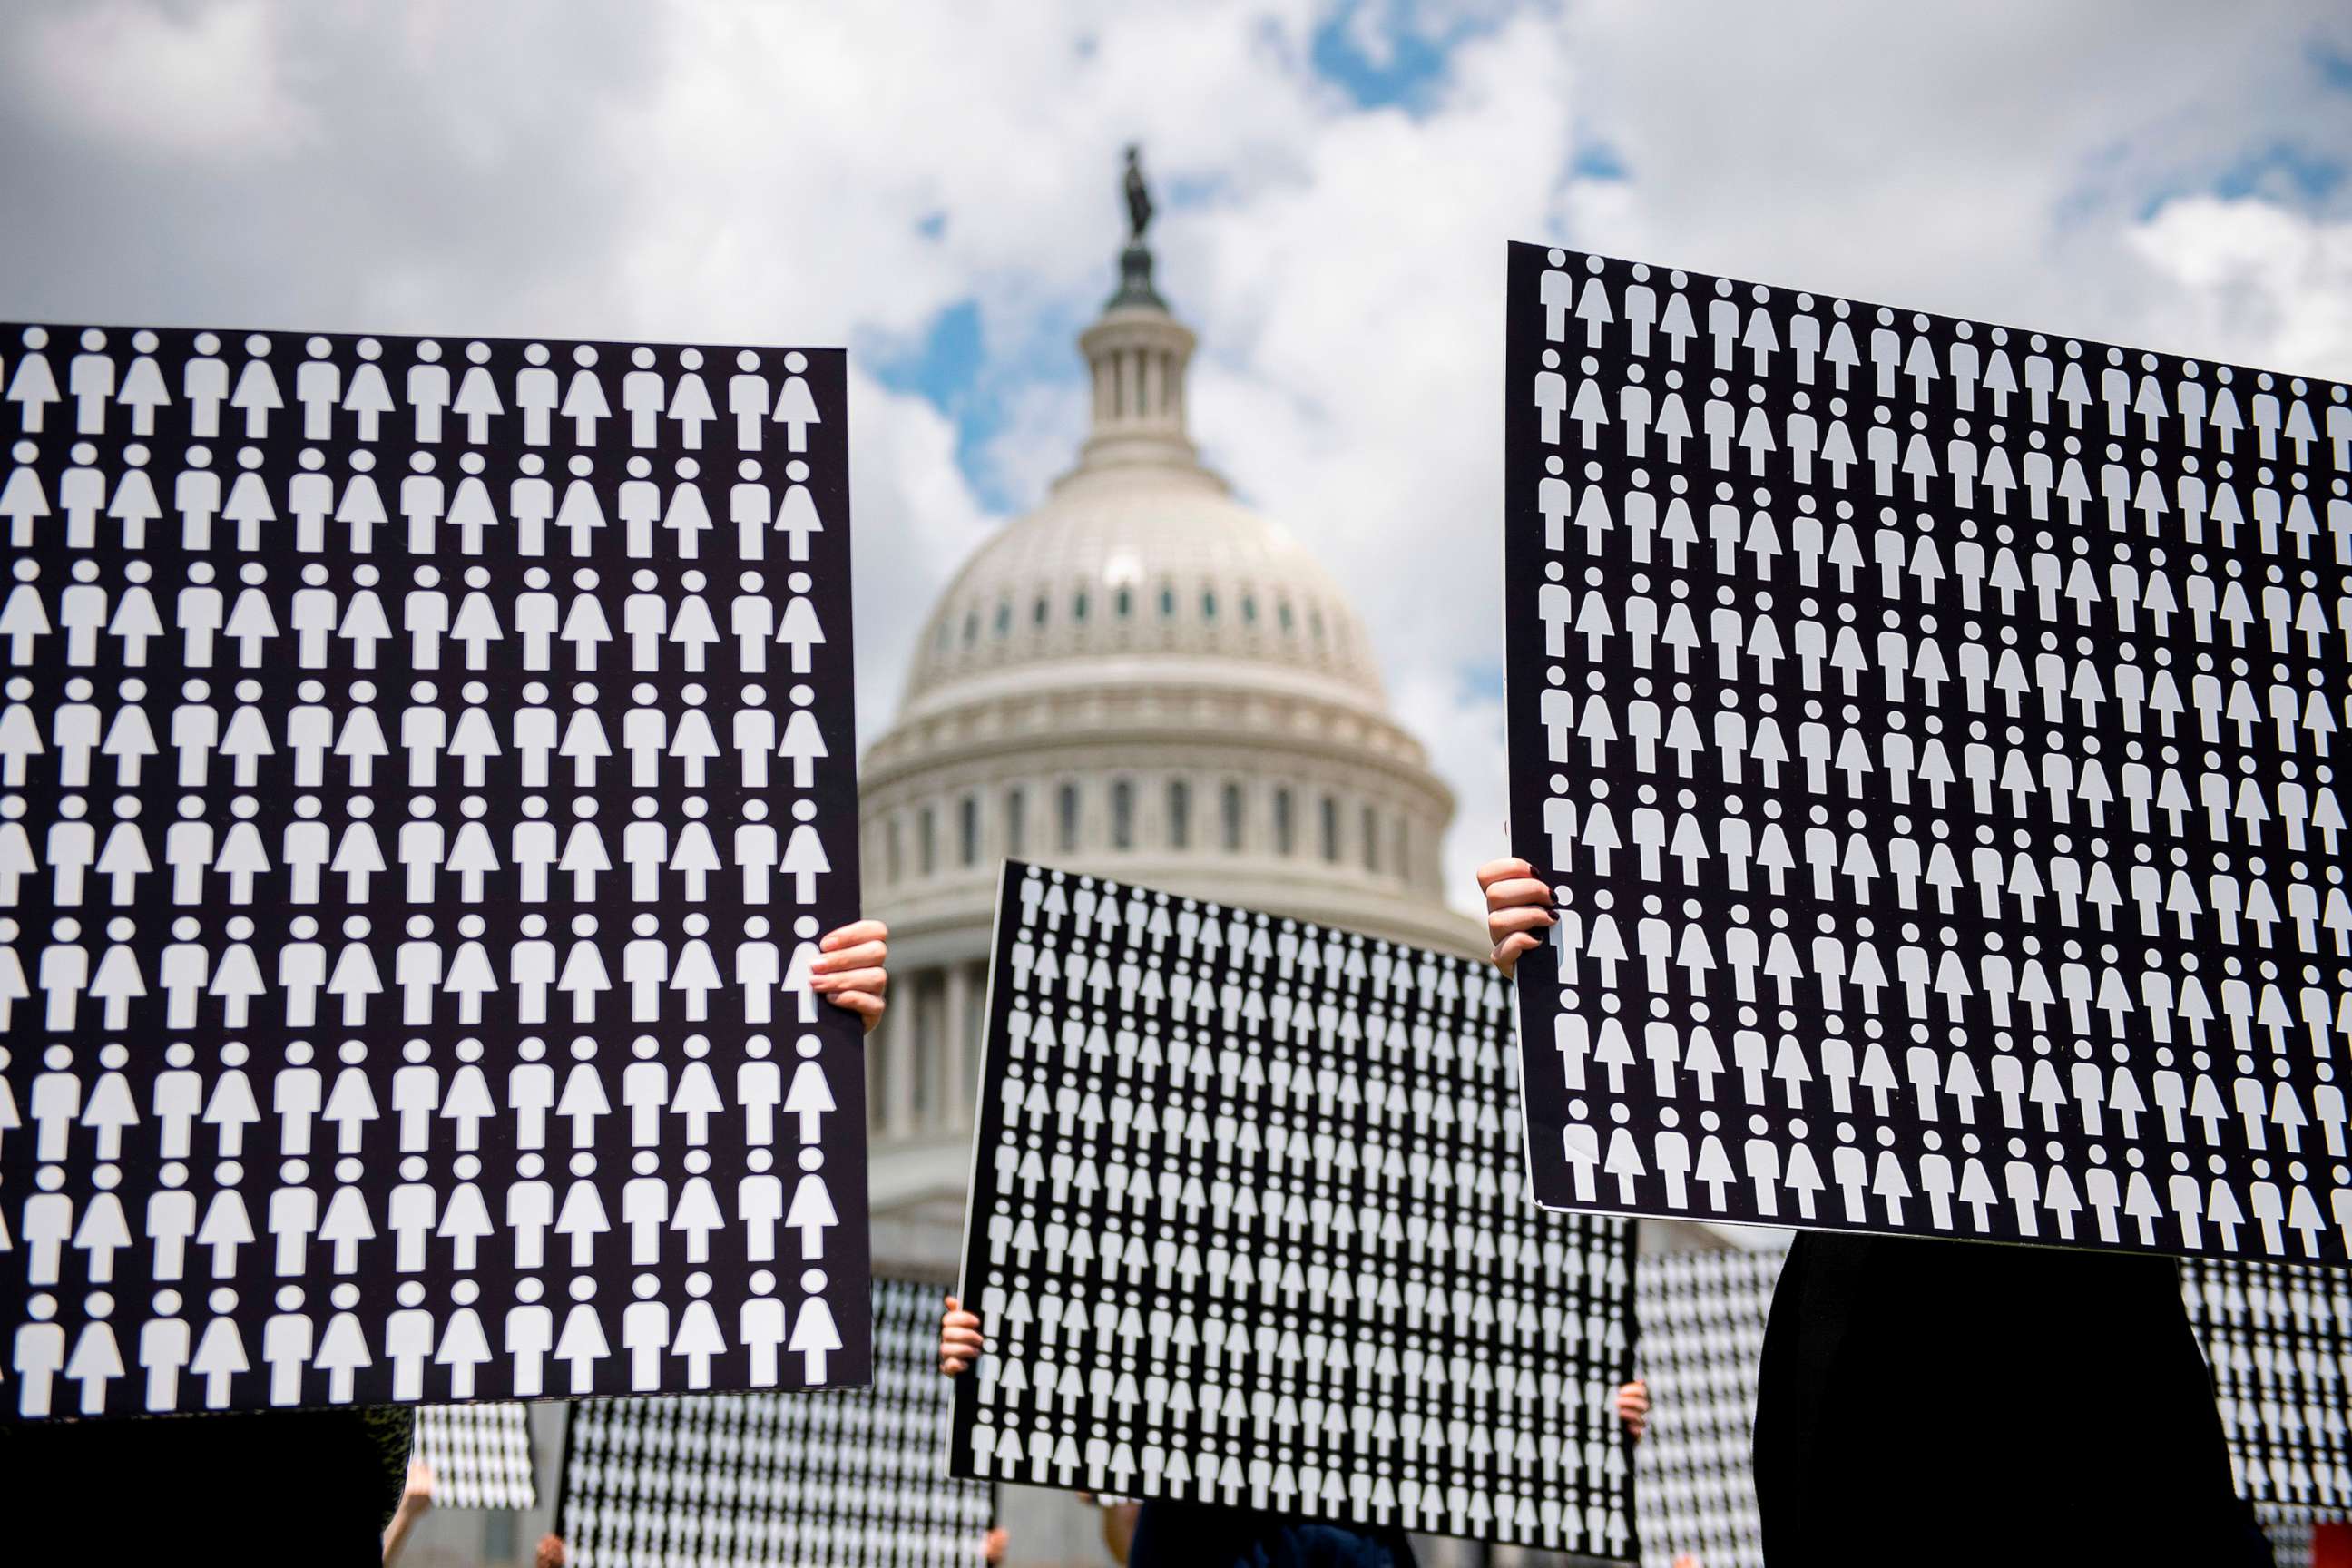 PHOTO: Demonstrators hold up placards representing the number of the people who have died due to gun violence on Capitol Hill in Washington, D.C. on June 20, 2019, during an event with gun violence prevention advocates.